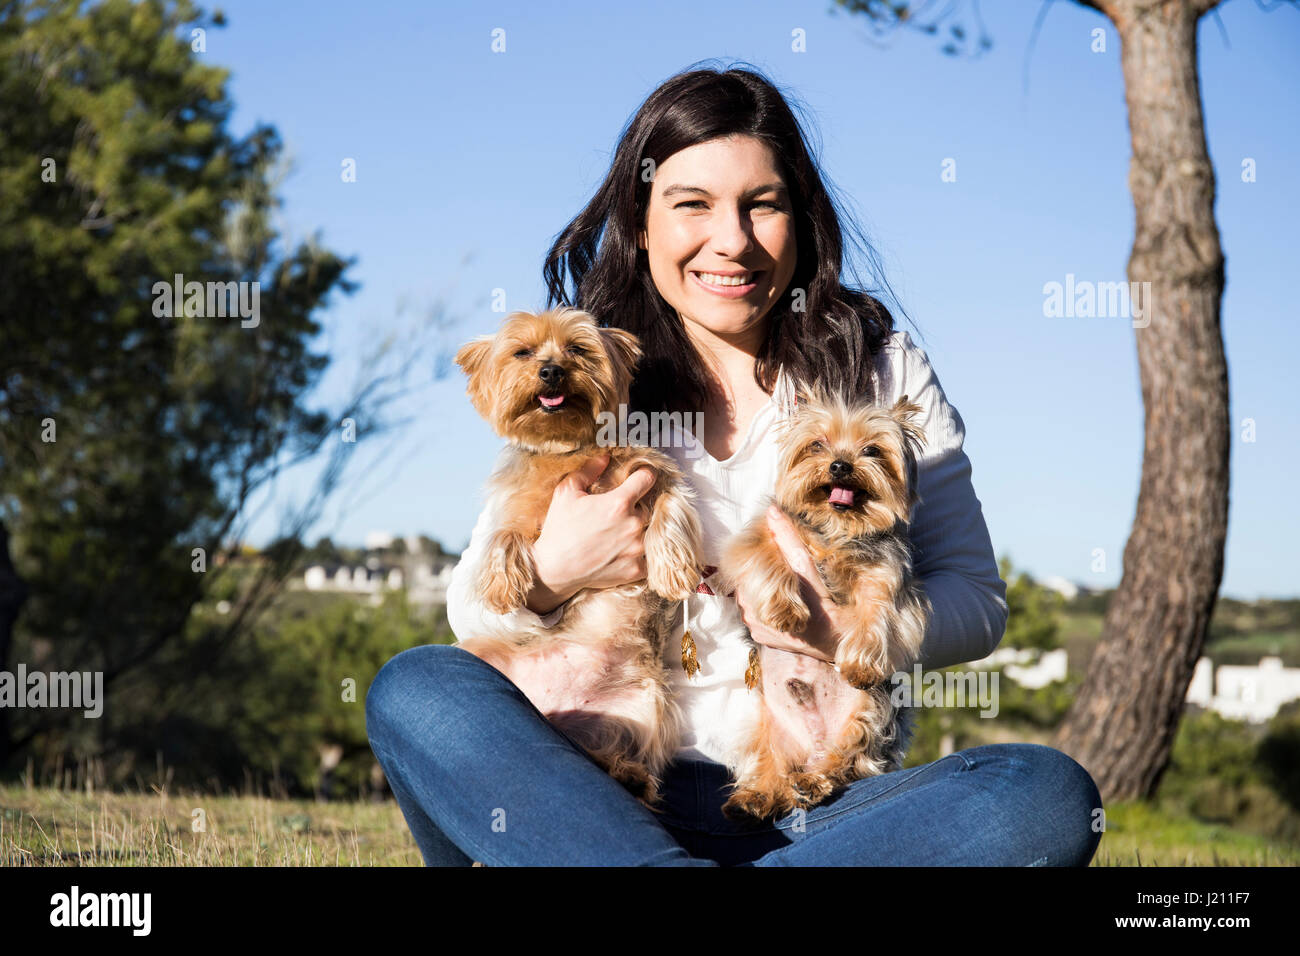 Portrait of happy young woman sitting with her Yorkshire Terriers on a meadow Stock Photo